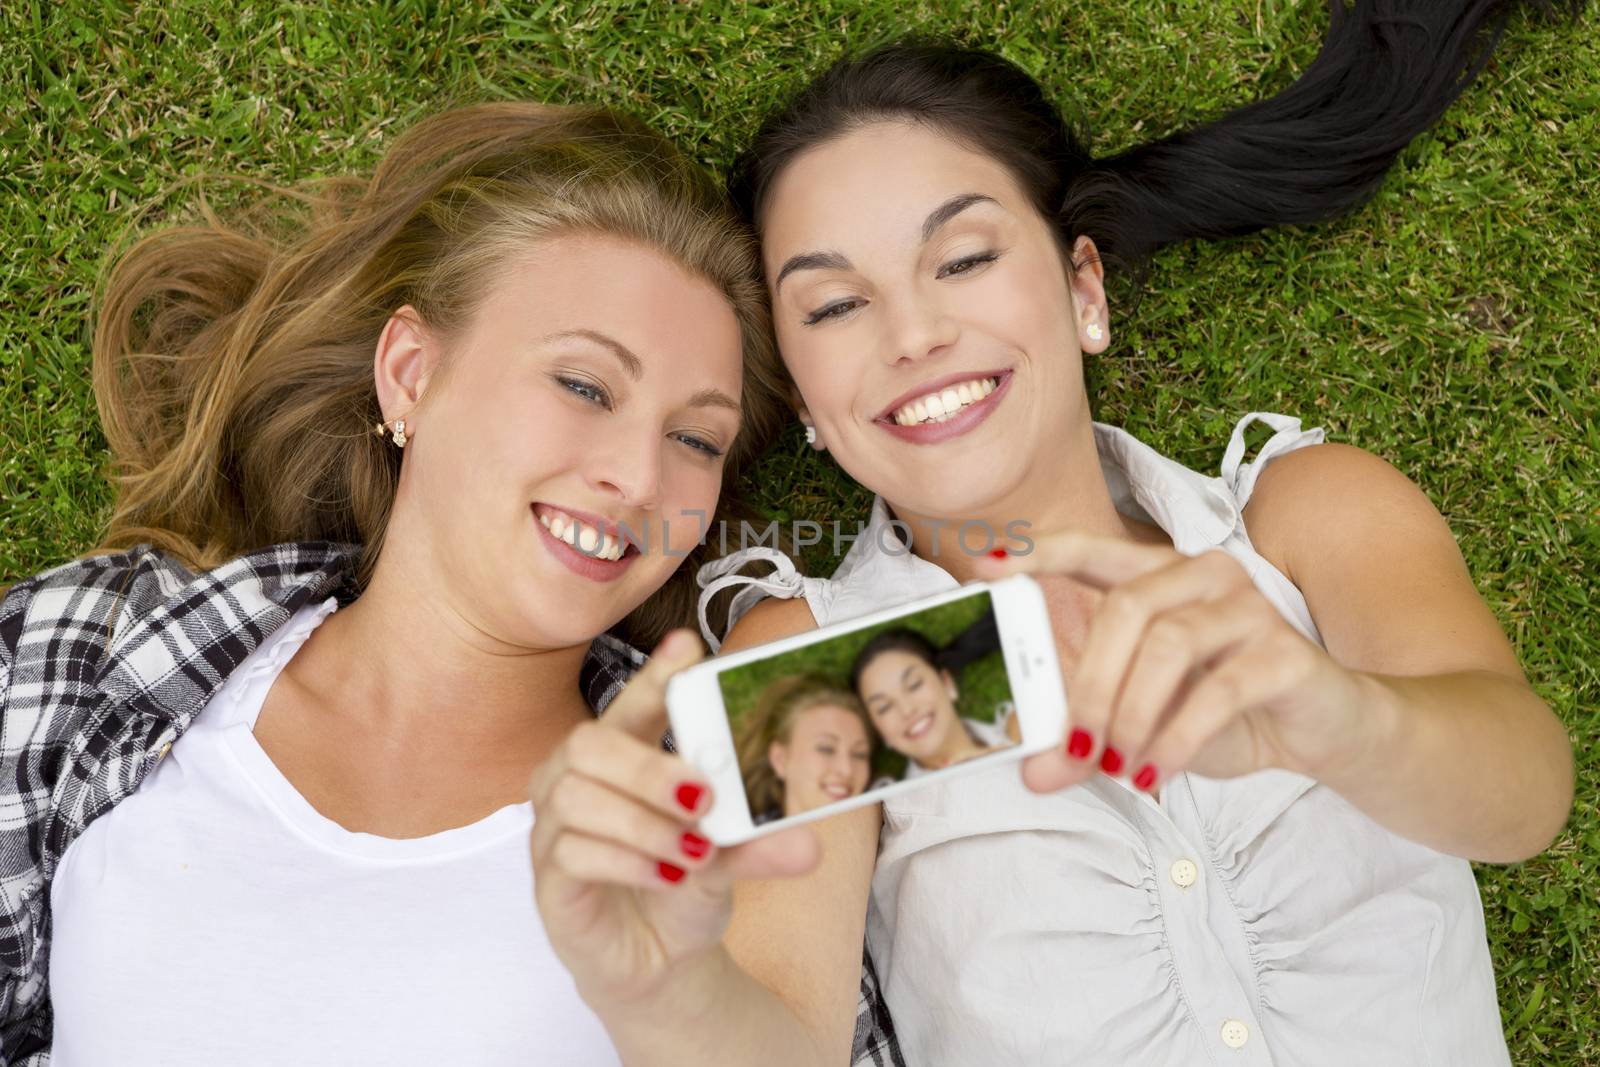 Female best friends lying on the grass and taking selfies